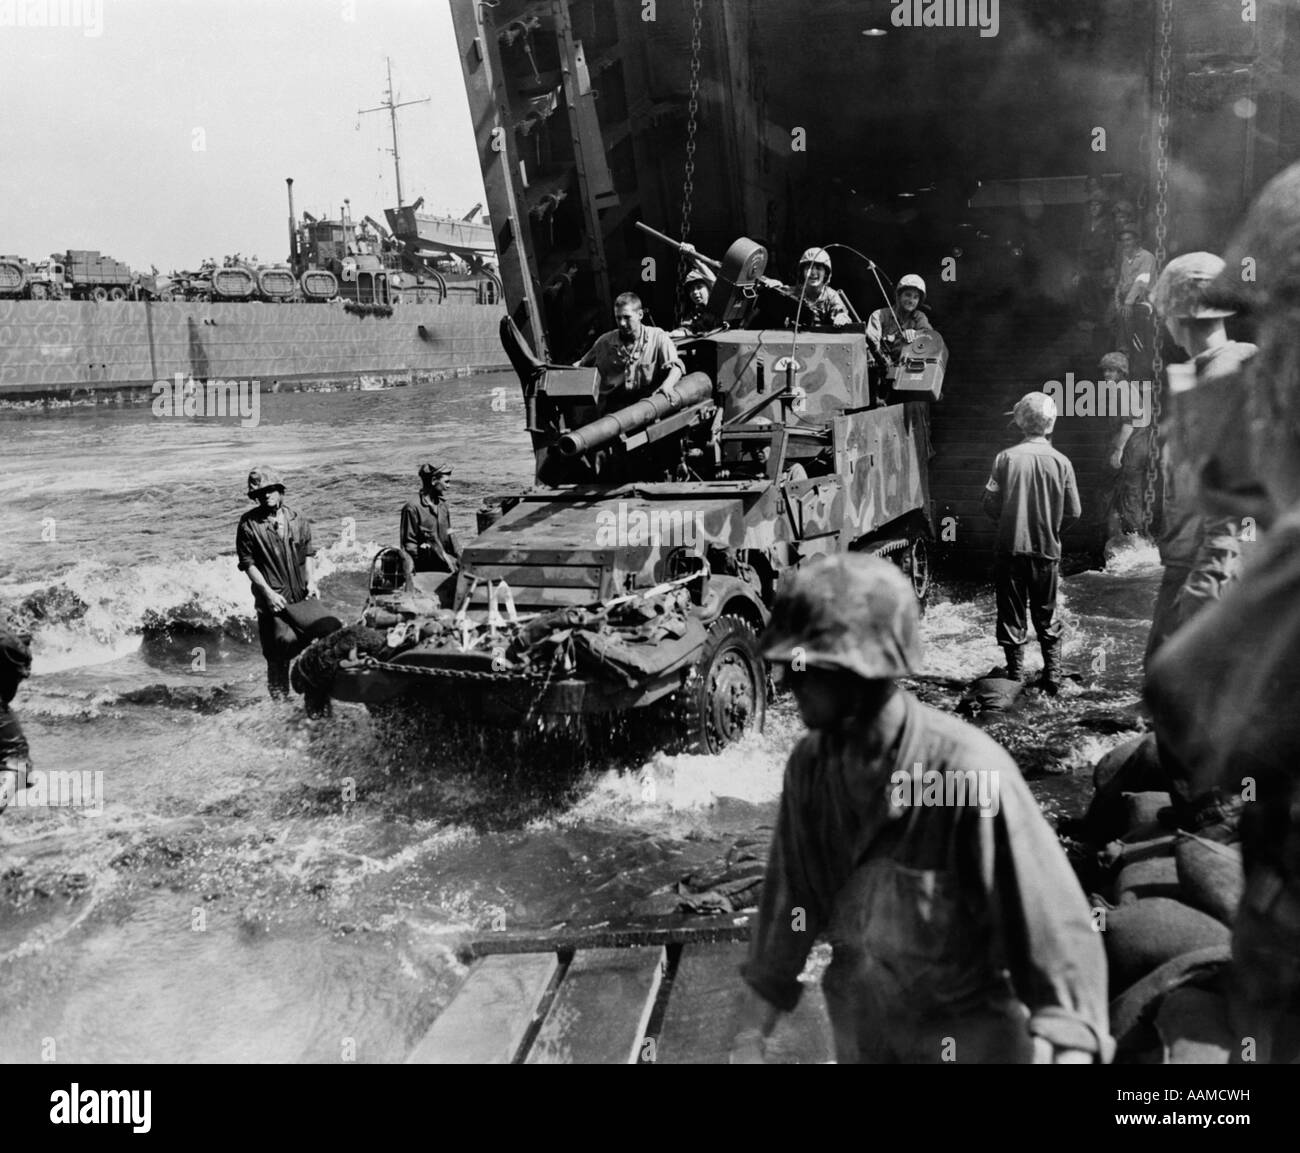 1940s MARINES EMERGE FROM NAVAL LANDING CRAFT ON A HALF TRACK VEHICLE ARMED WITH GUNS SOLDIERS WAR INVASION WEAPON MILITARY WWII Stock Photo